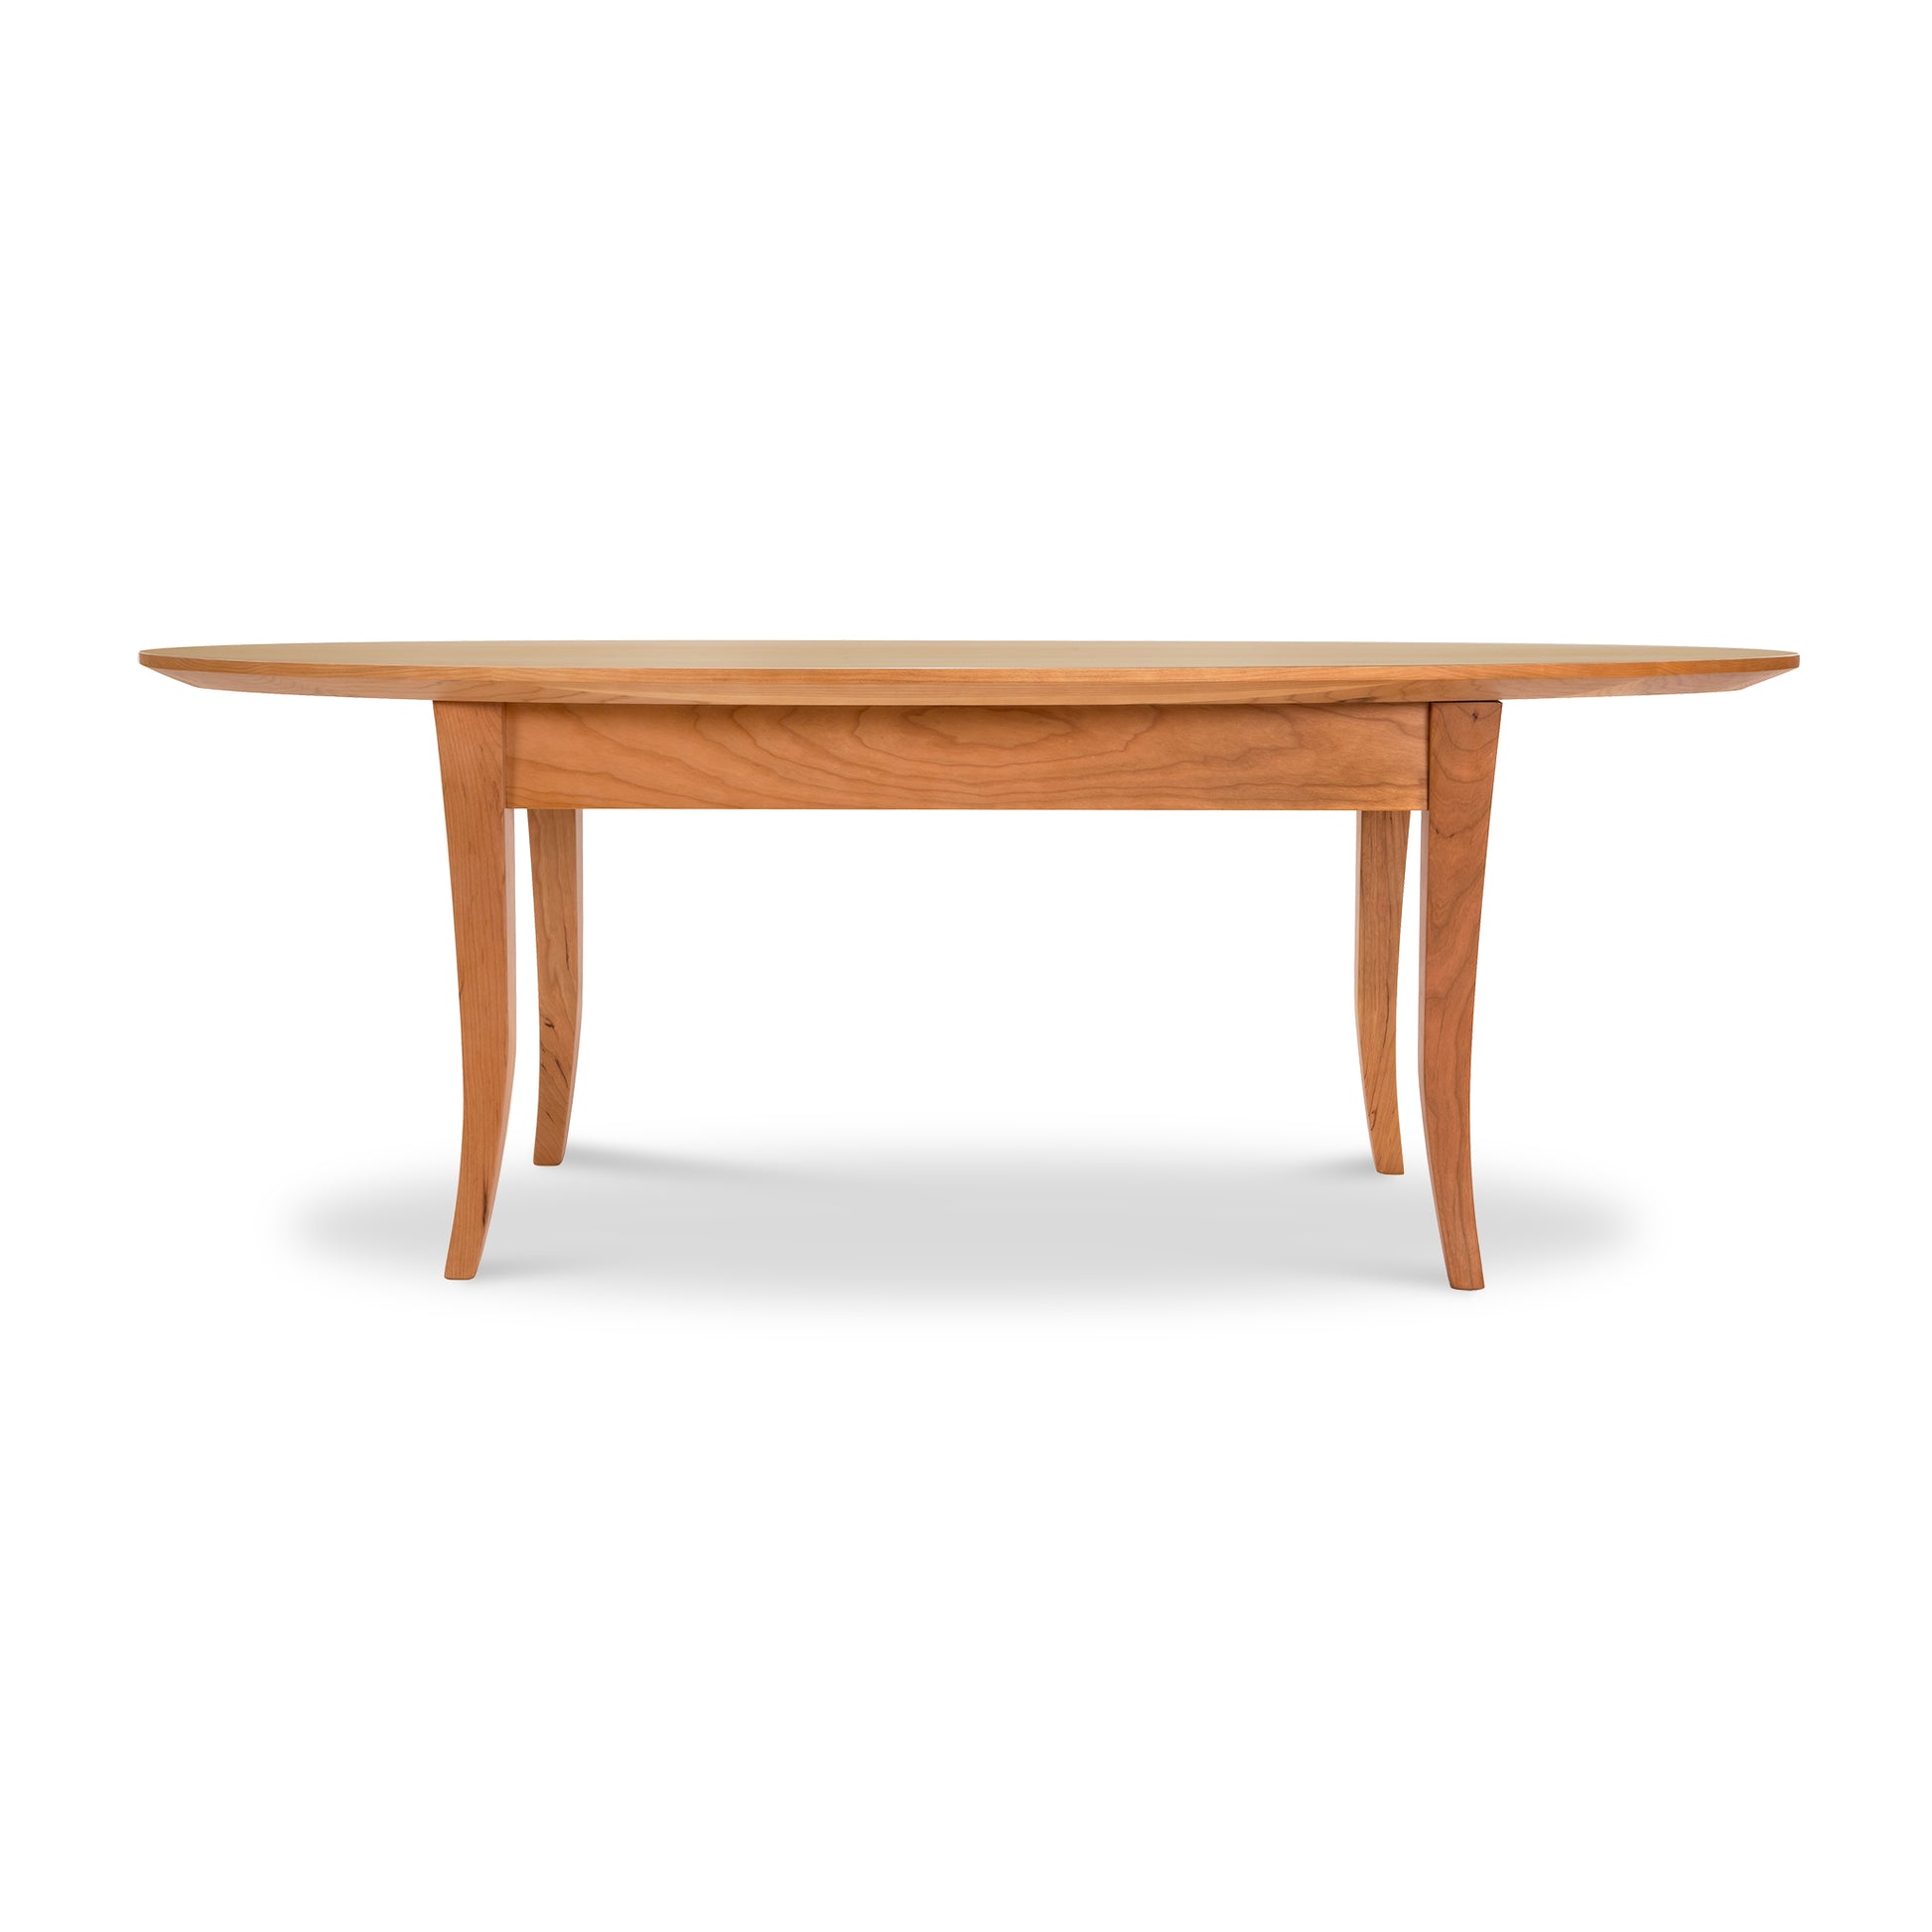 A Lyndon Furniture Classic Shaker Flare Leg Oval Top Coffee Table, made from sustainably harvested hardwoods in Vermont, featuring a classic shaker design with flared legs.